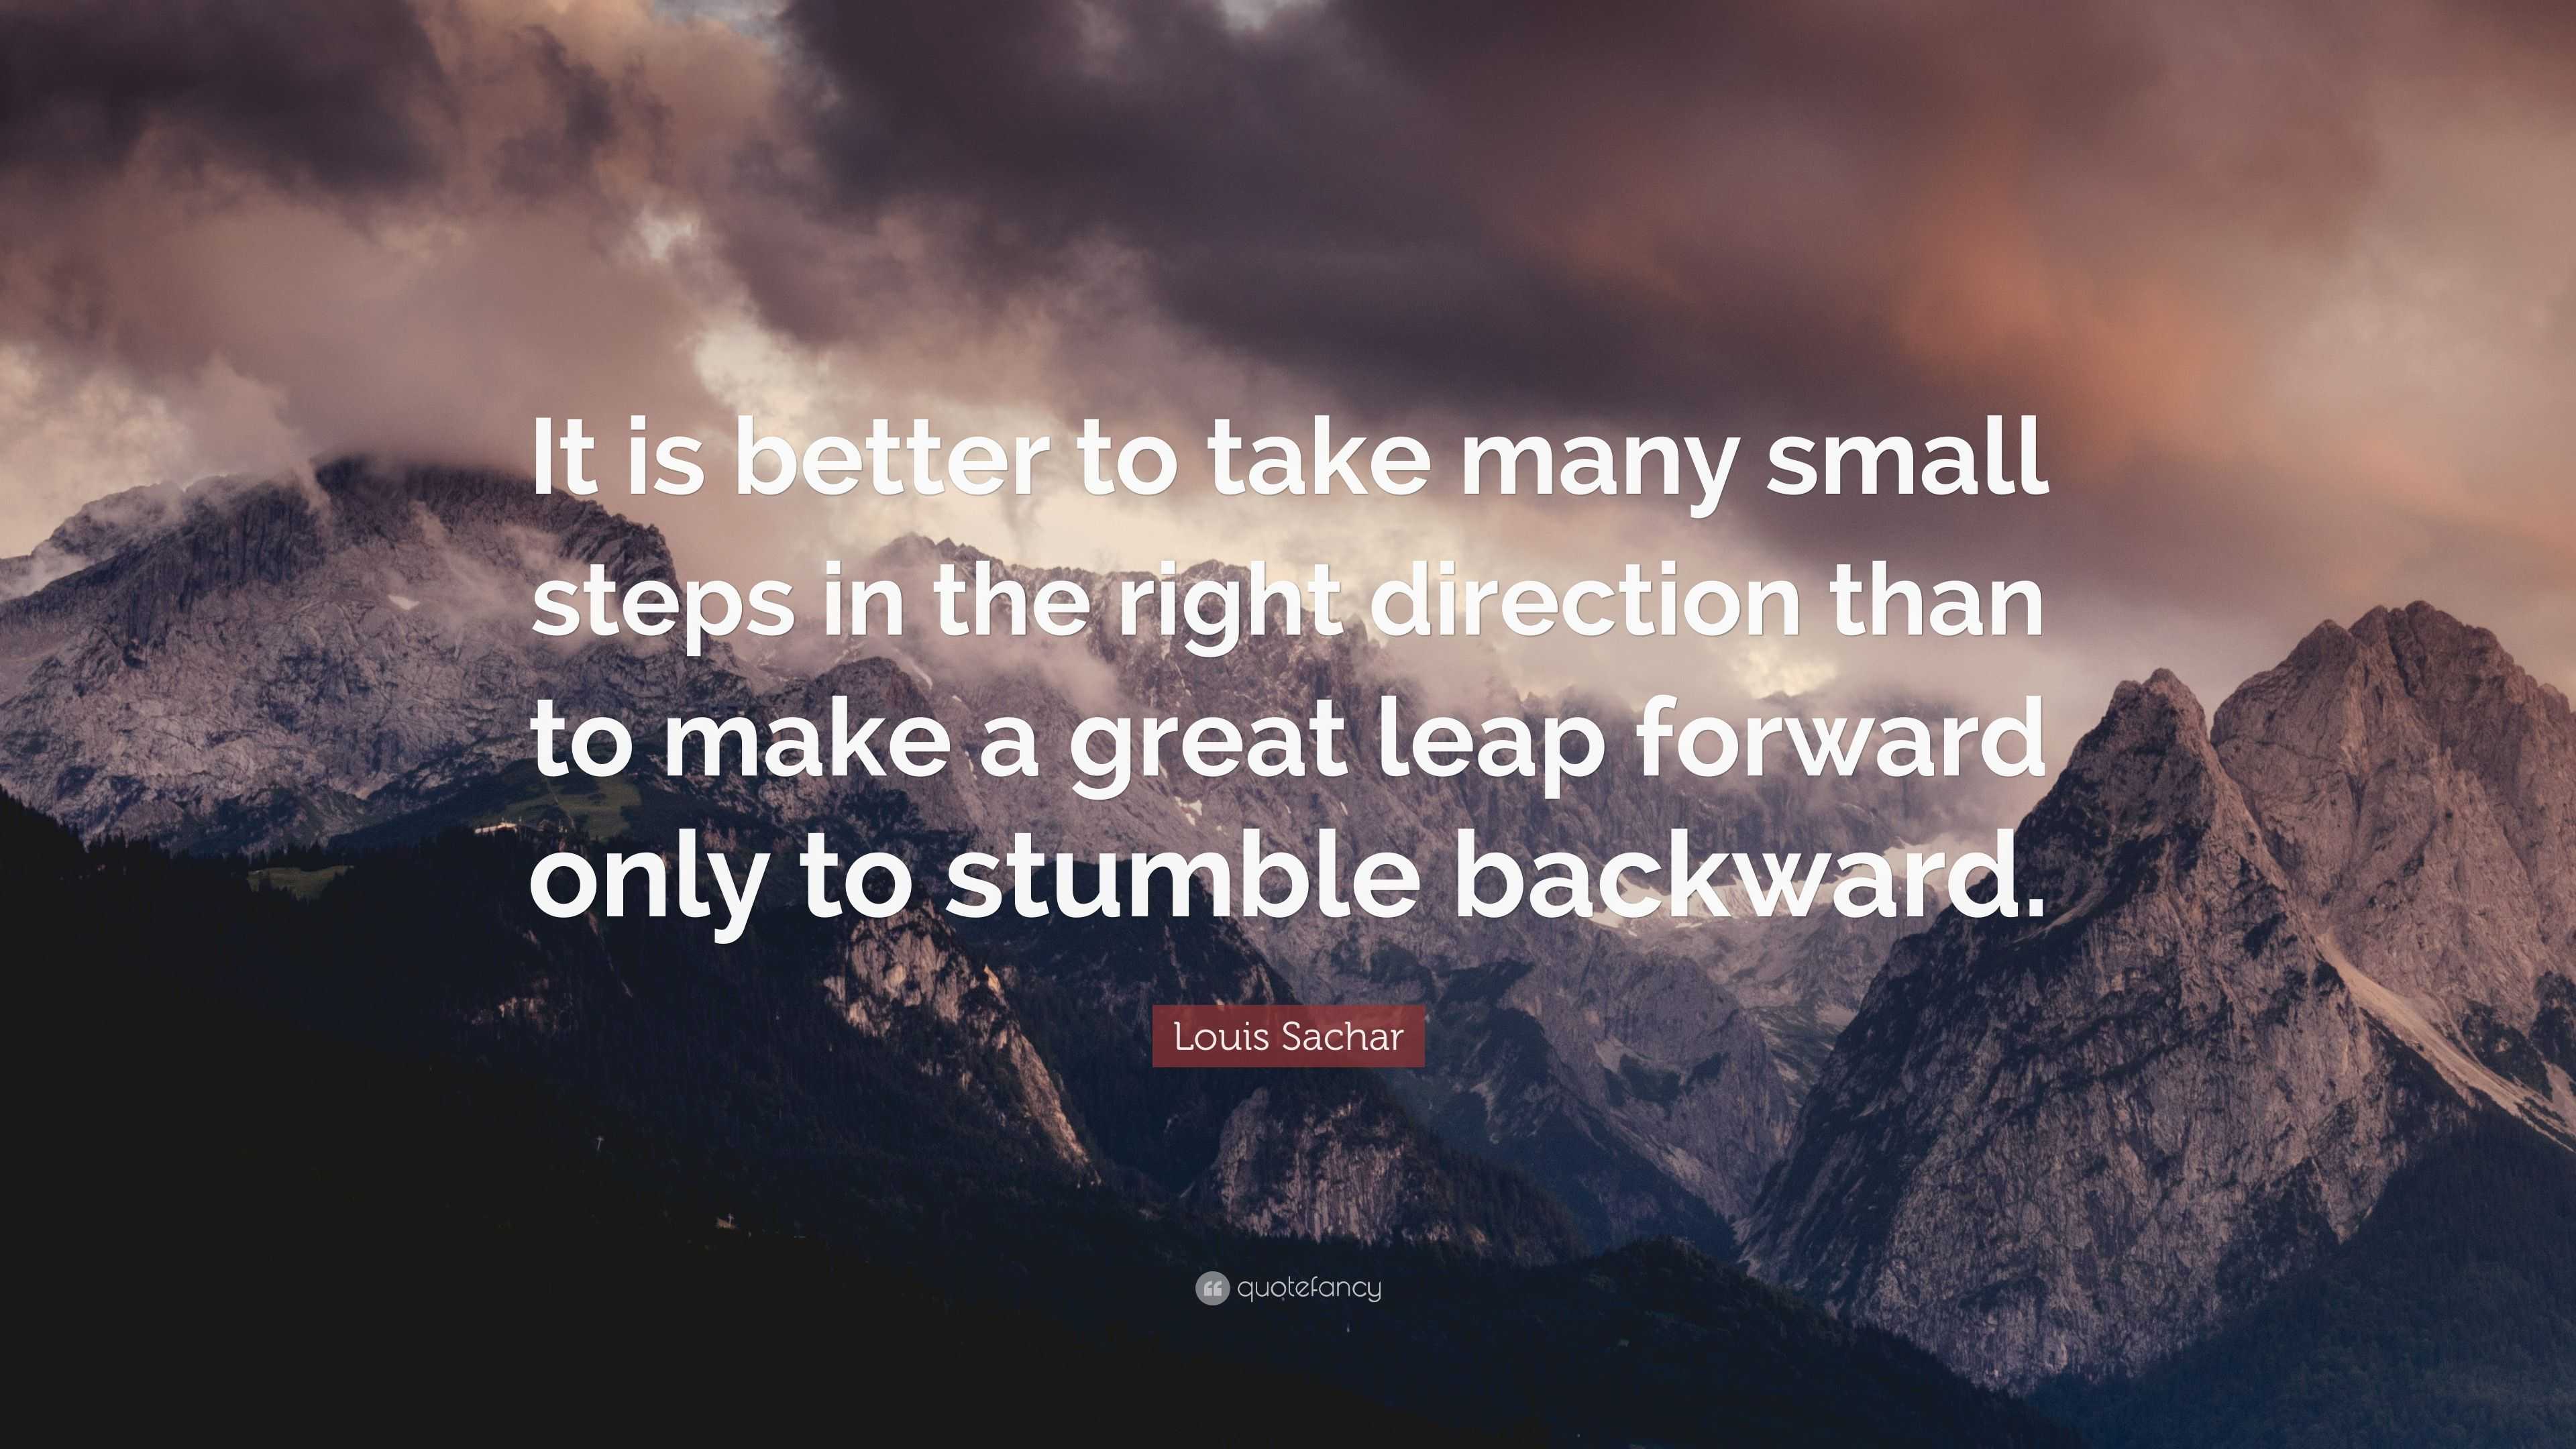 Decide to take the small steps in the right direction today